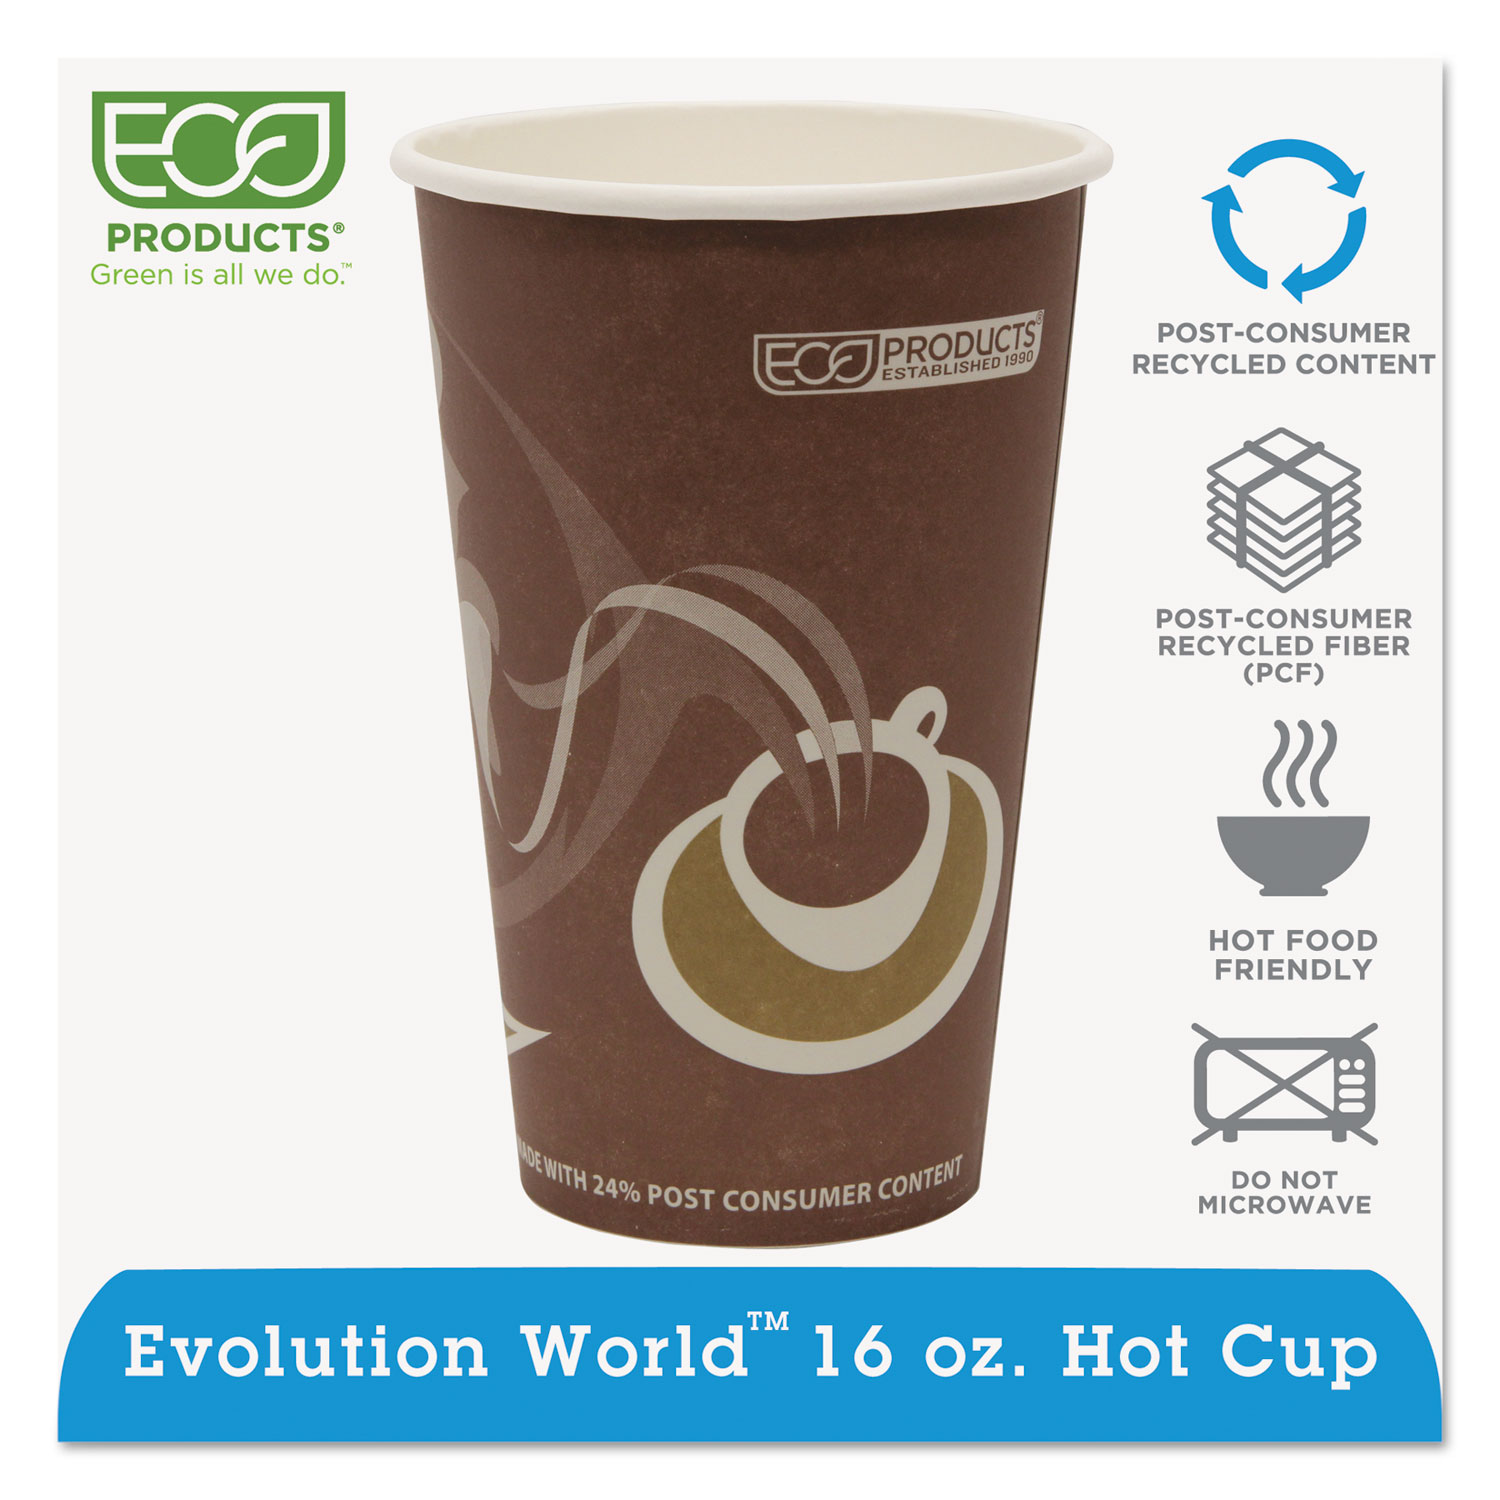  Eco-Products EP-BRHC16-EW Evolution World 24% Recycled Content Hot Cups - 16oz., 50/PK, 20 PK/CT (ECOEPBRHC16EW) 